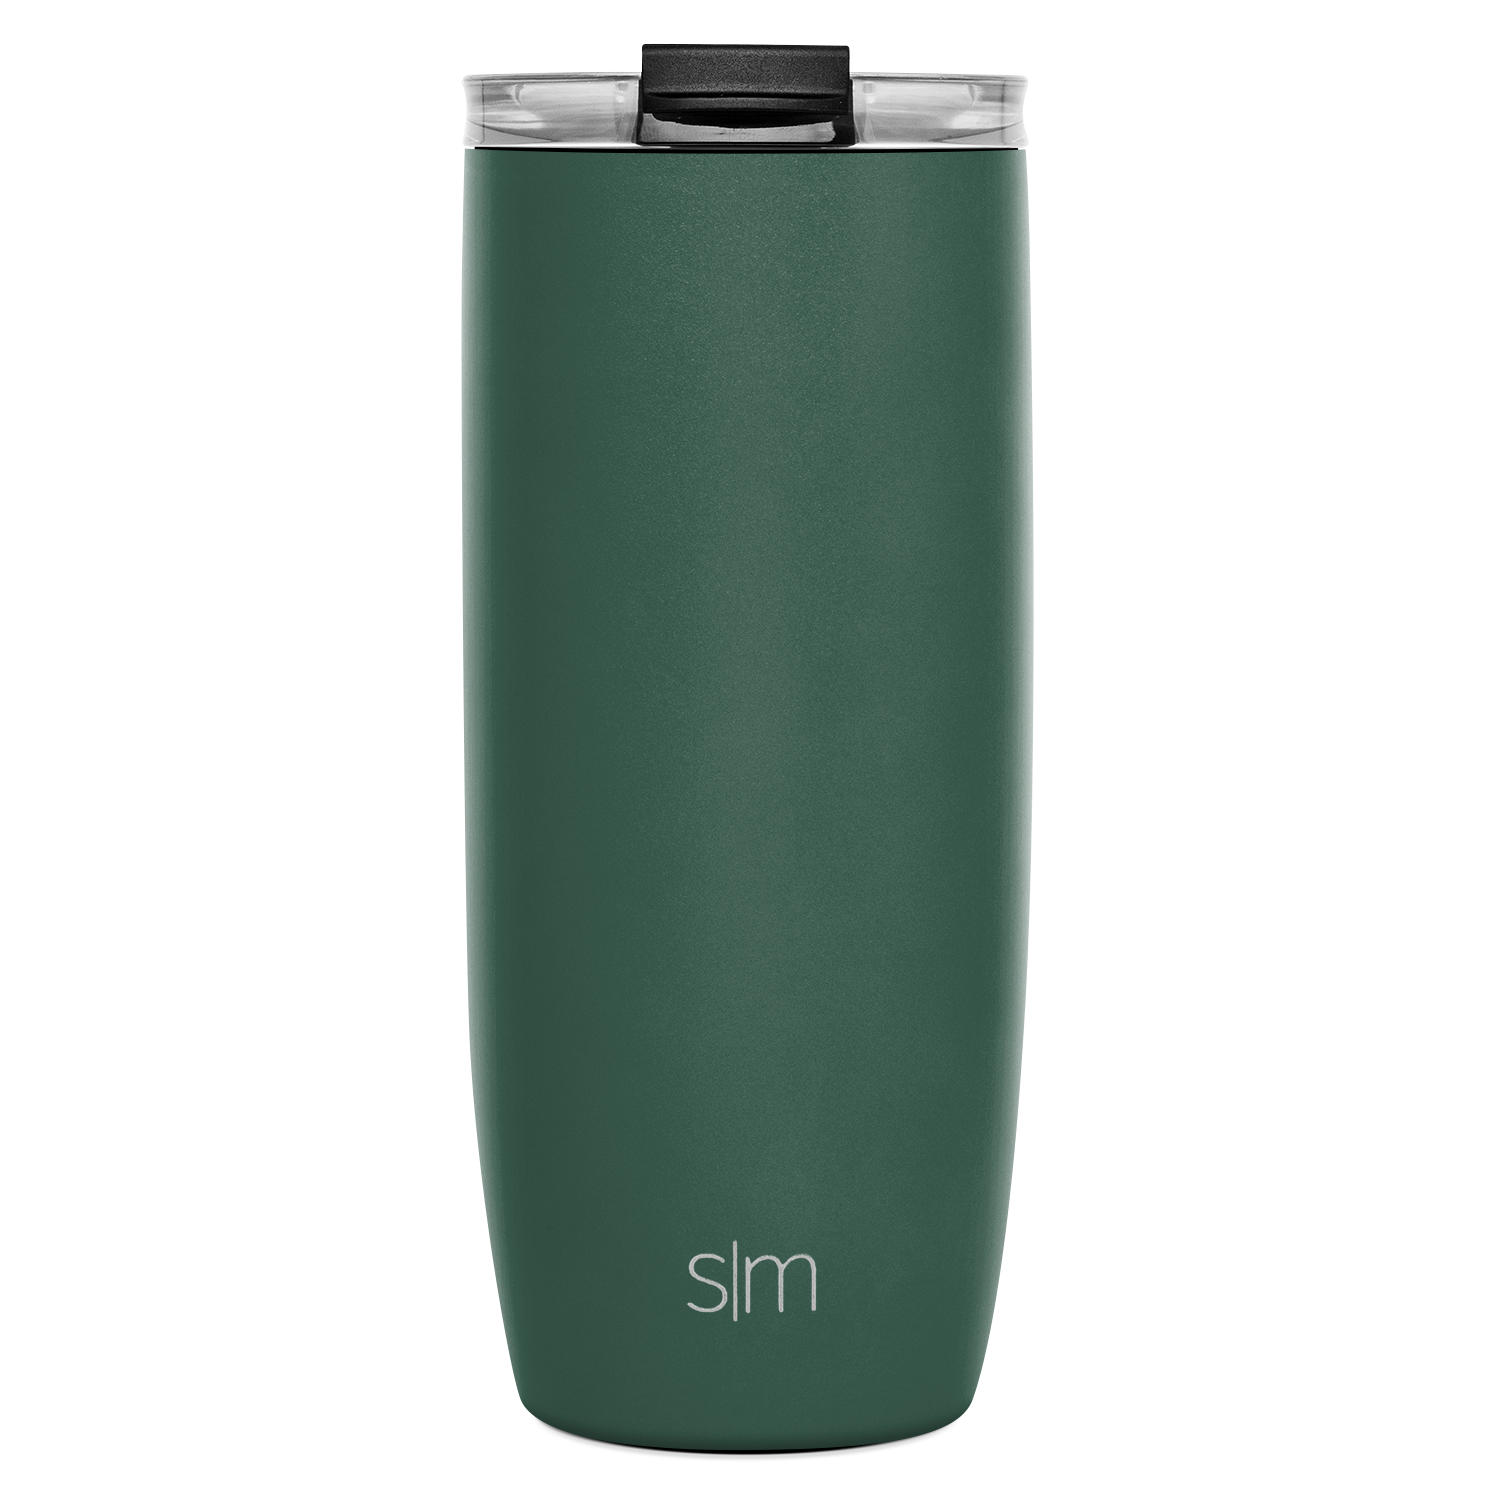 Voyager Travel Mug Tumbler with Clear Flip Lid & Straw - Coffee